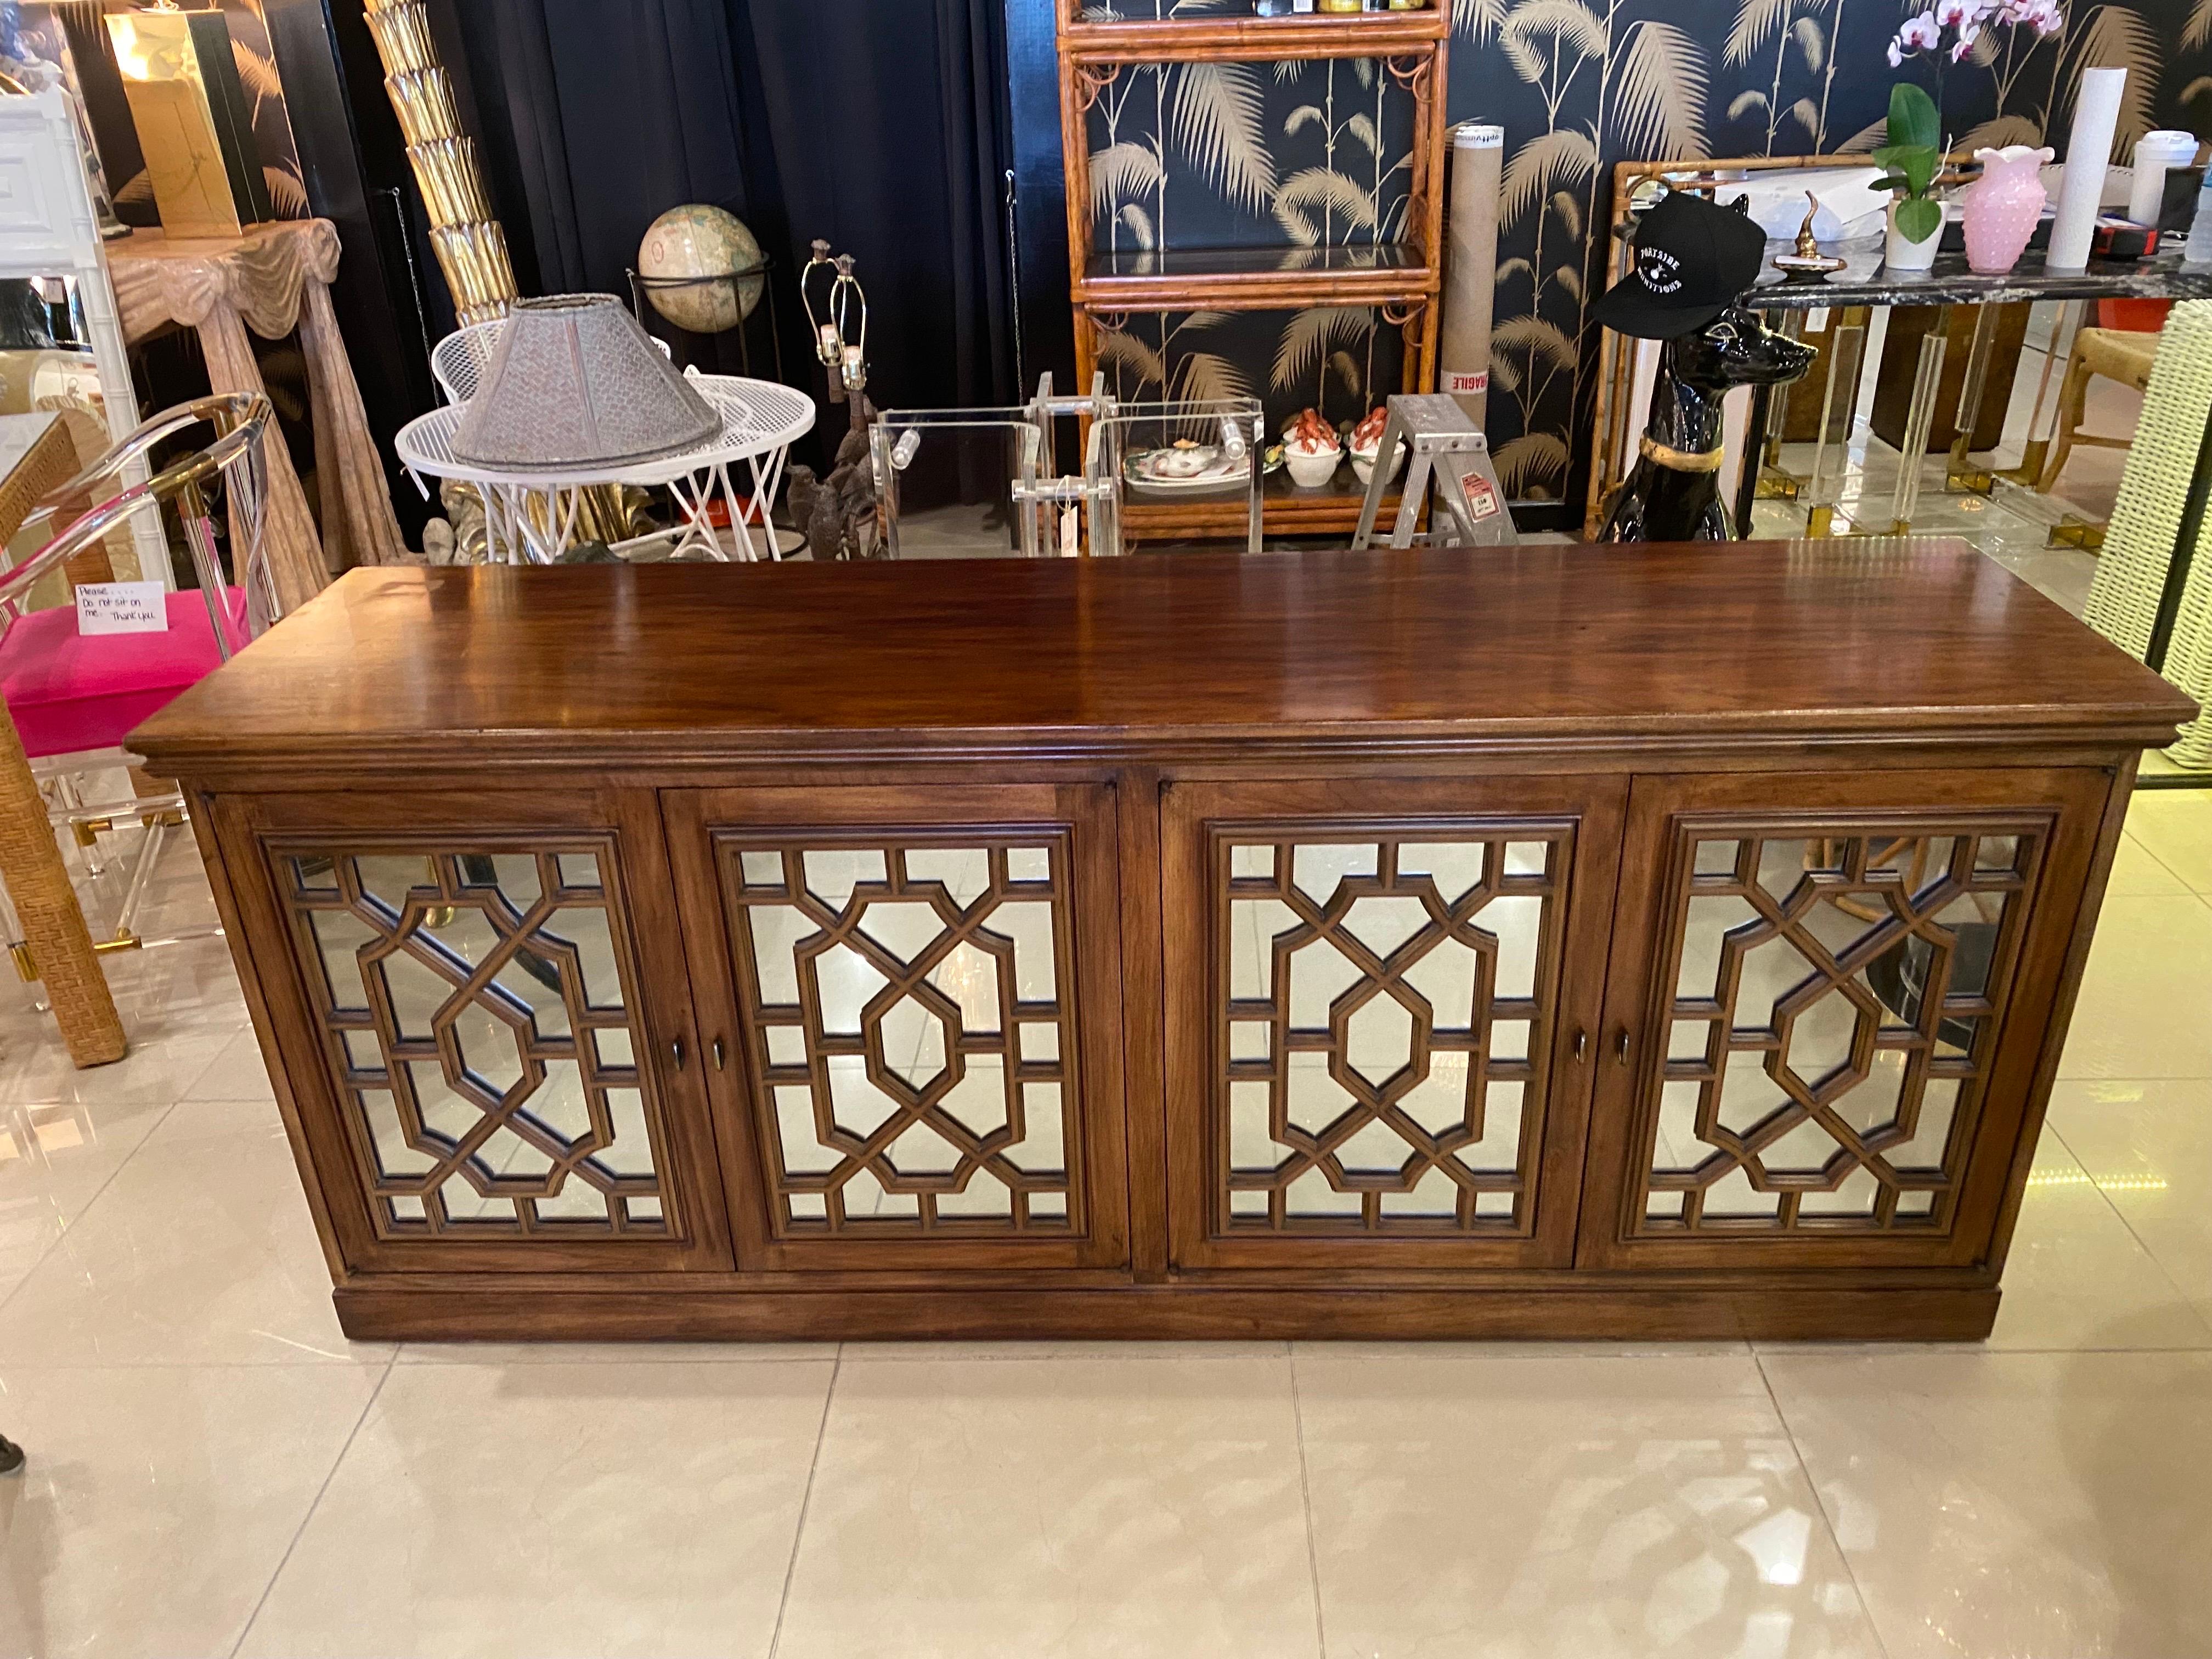 Vintage Wood Chinoiserie Fretwork Fret Mirrored Credenza Buffet Sideboard Doors For Sale 7